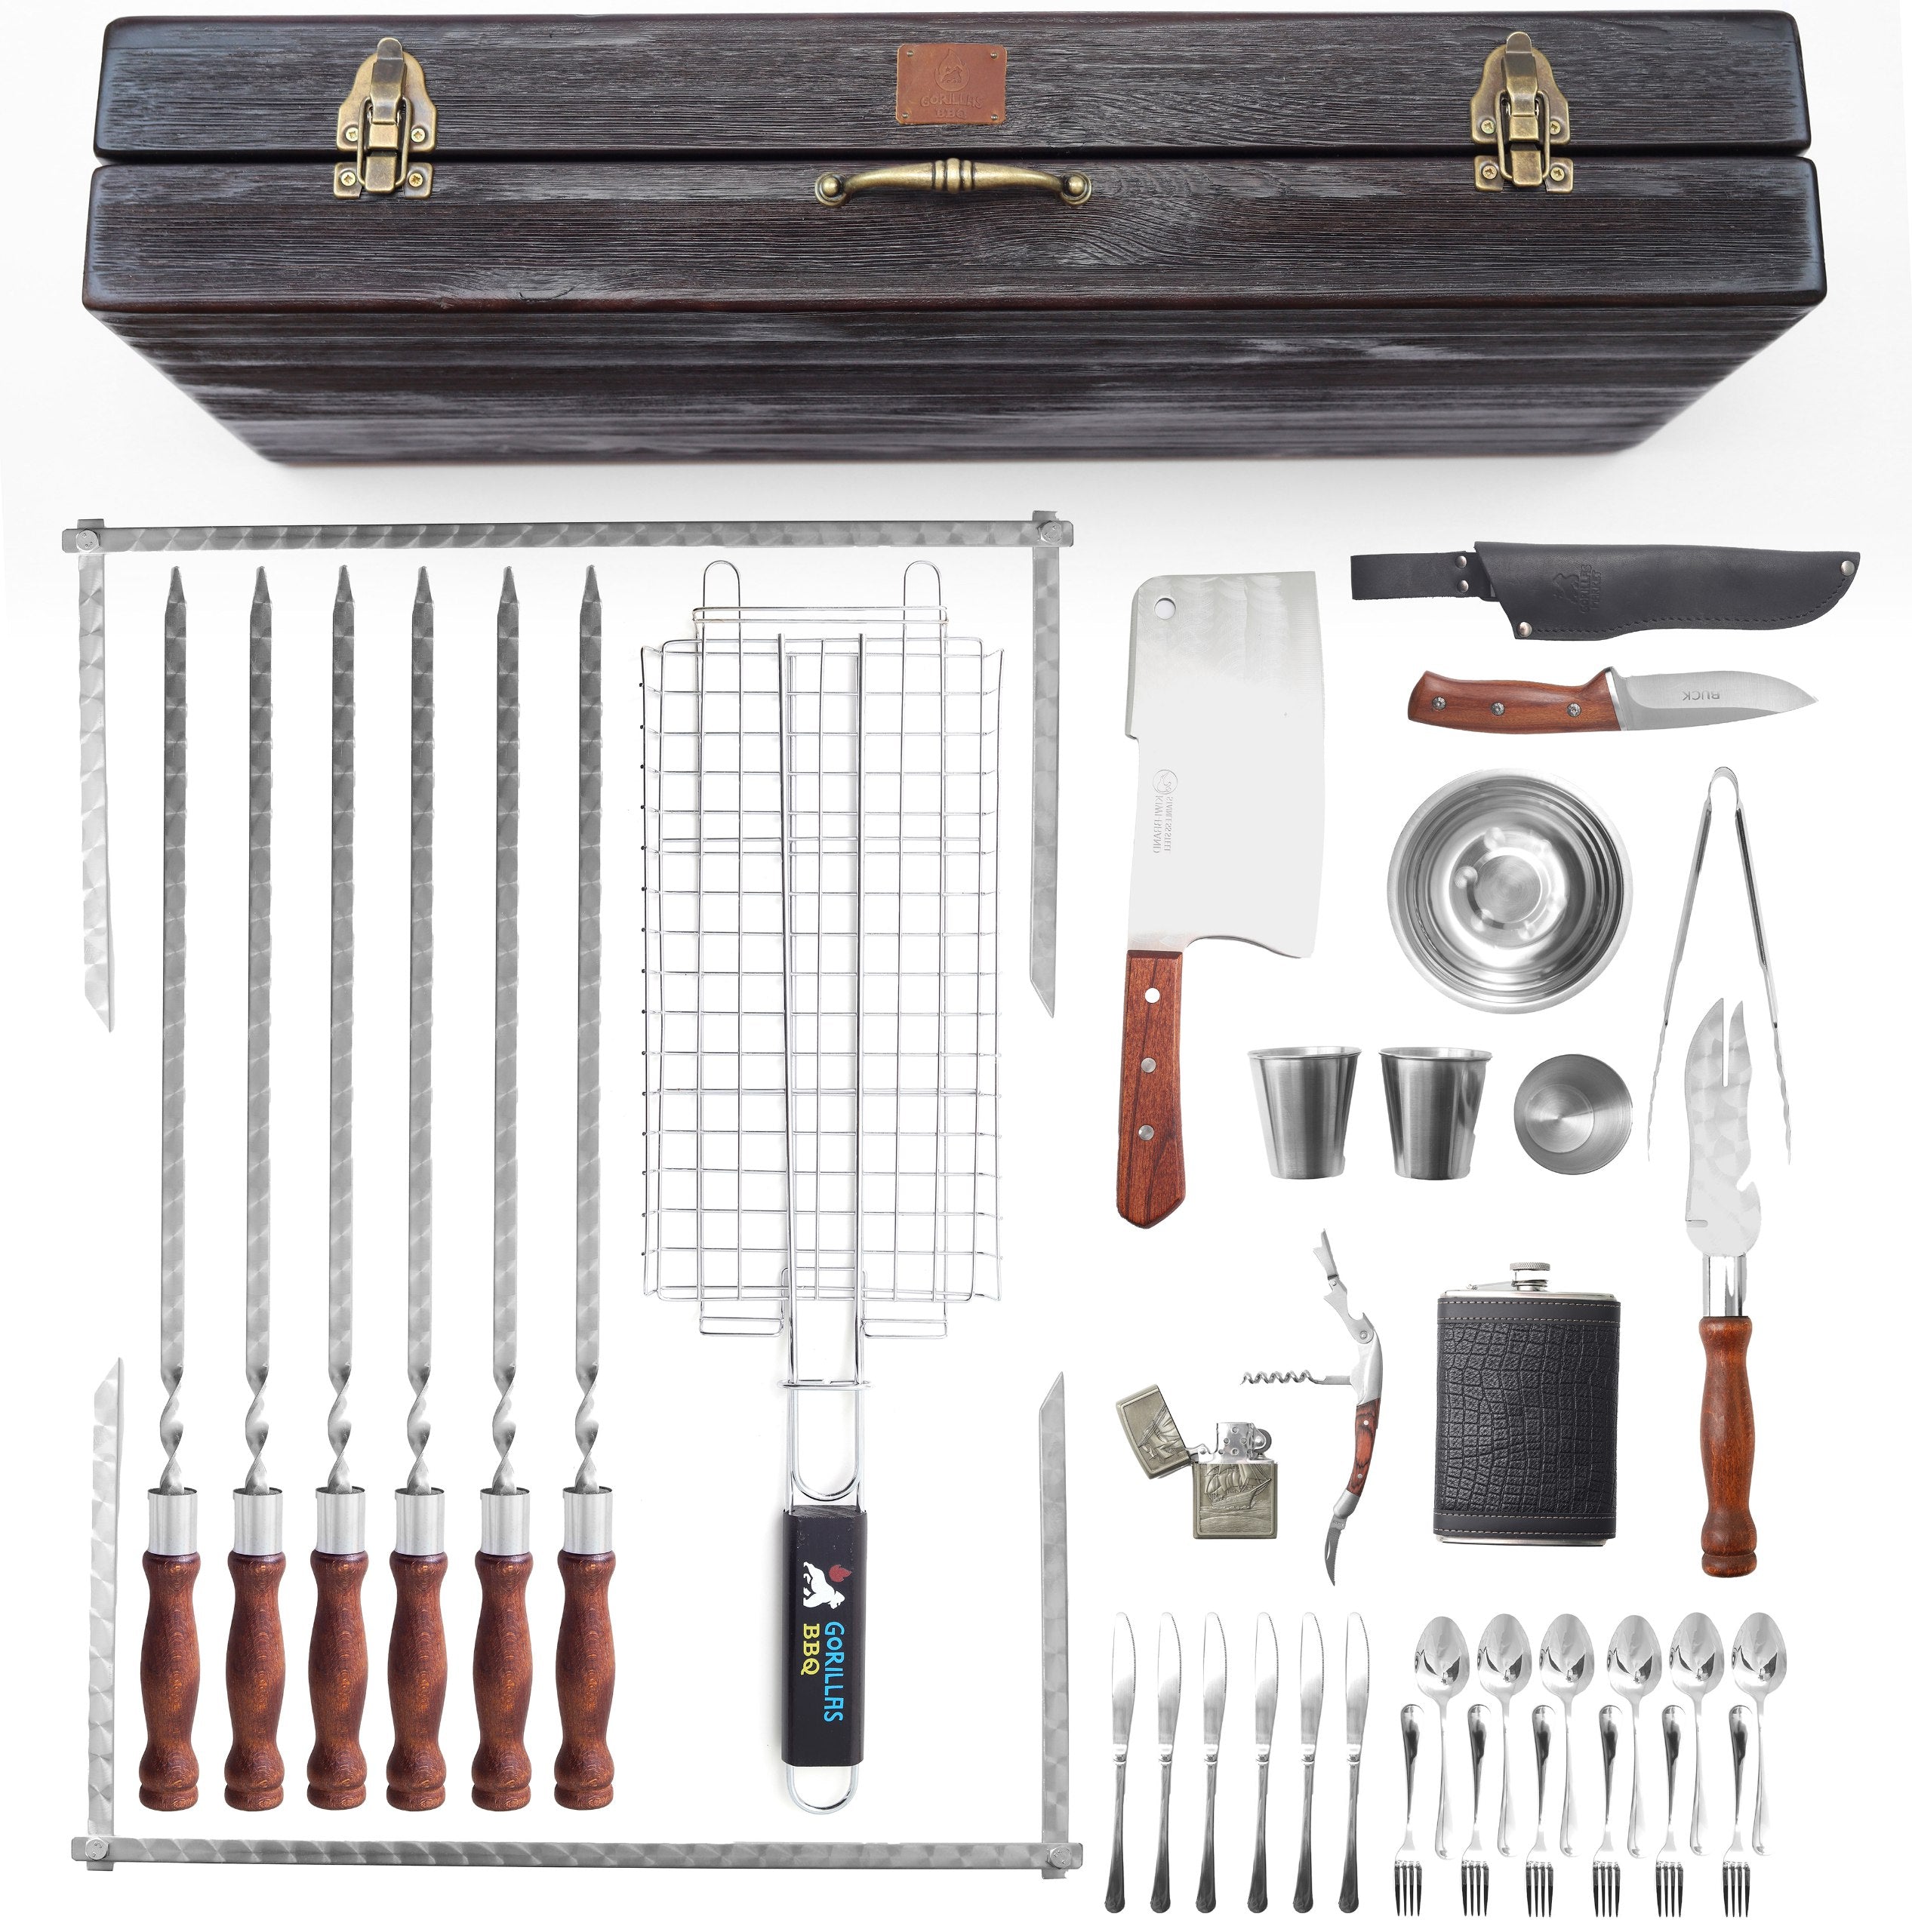 BBQ Grills and Accessories - Grilling Accessories – Skewers Set "Bison" - BBQ Set Tools In a Wooden Case, 45 item